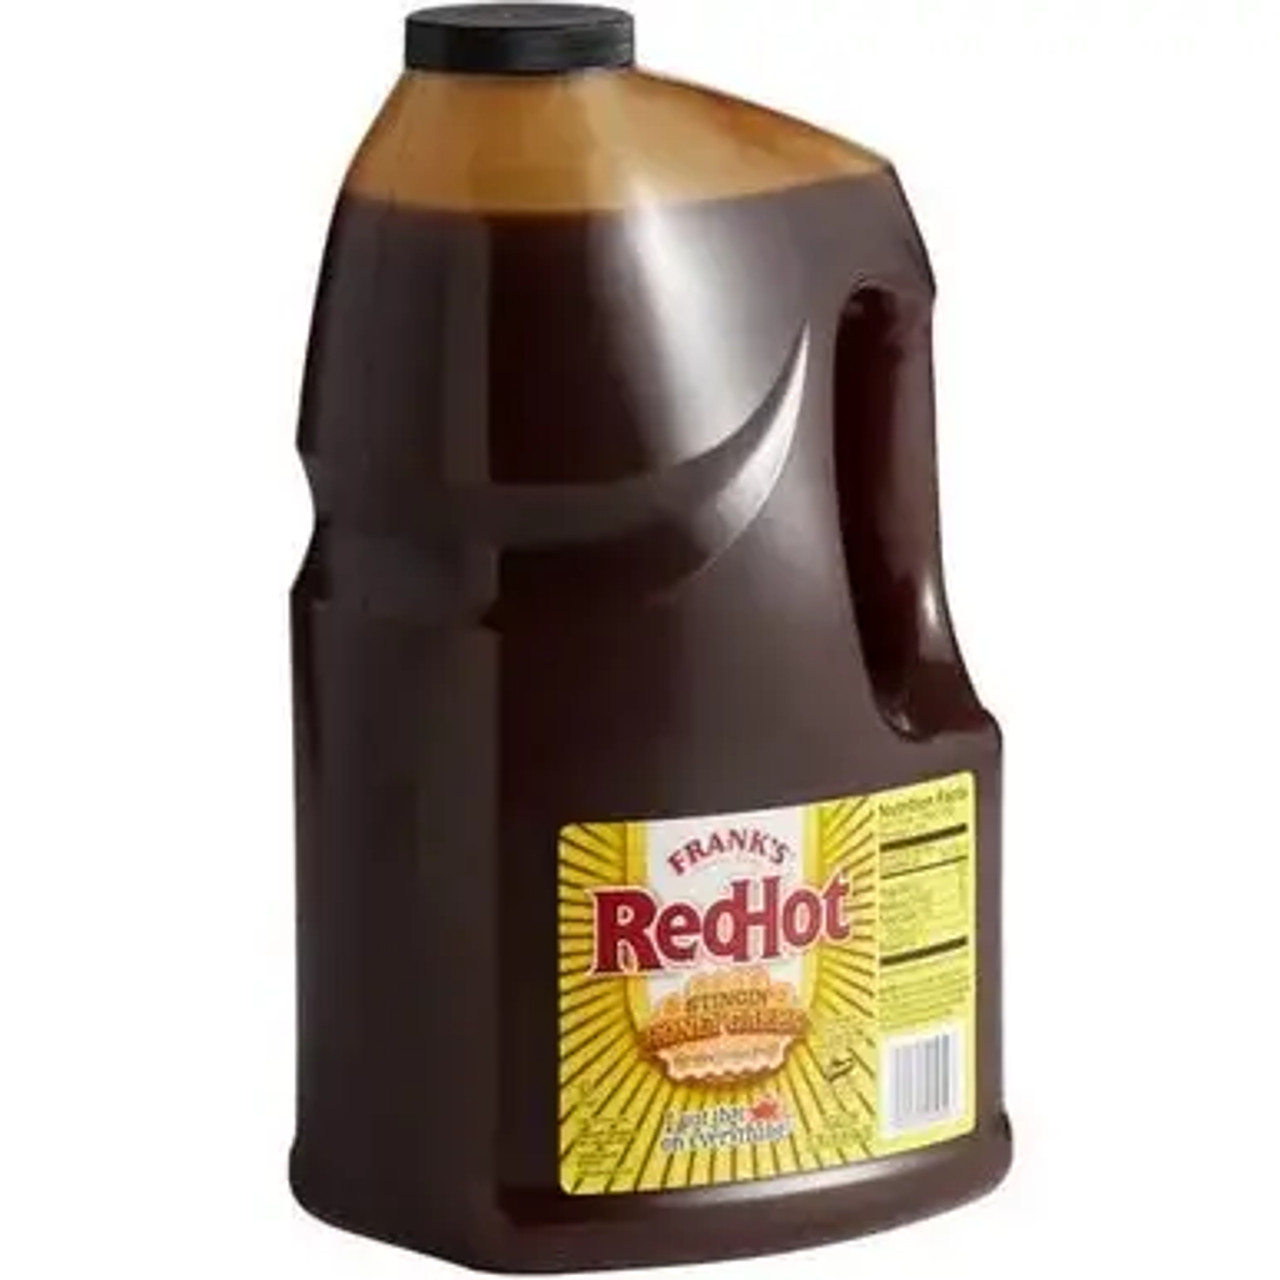 Frank's RedHot 1 Gallon Stingin' Honey Garlic Sauce - 2/Case | Sweet and Spicy Delight in Bulk